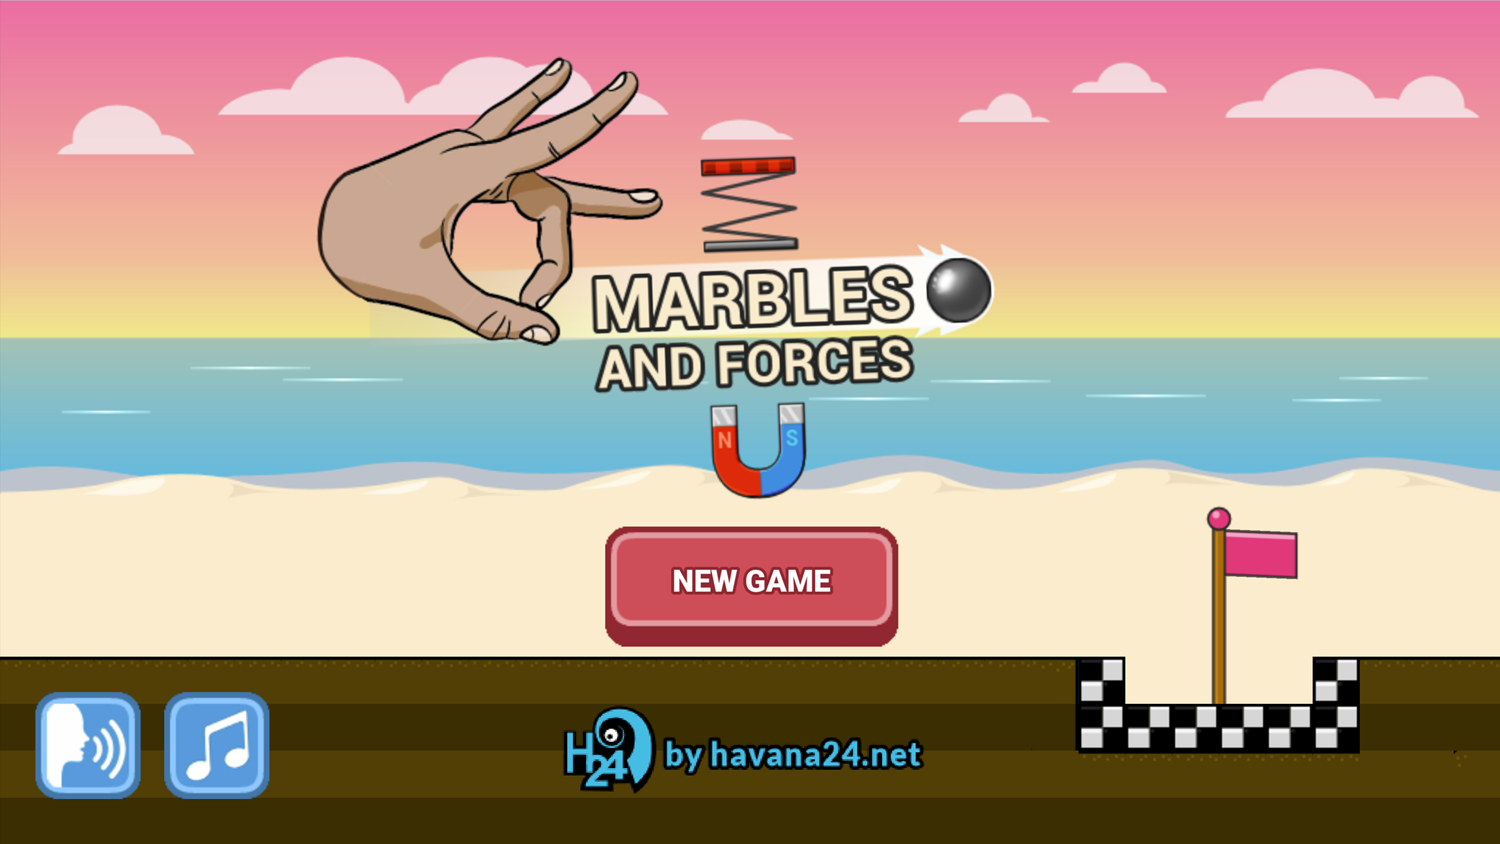 Marbles And Forces Game Welcome Screen Screenshot.